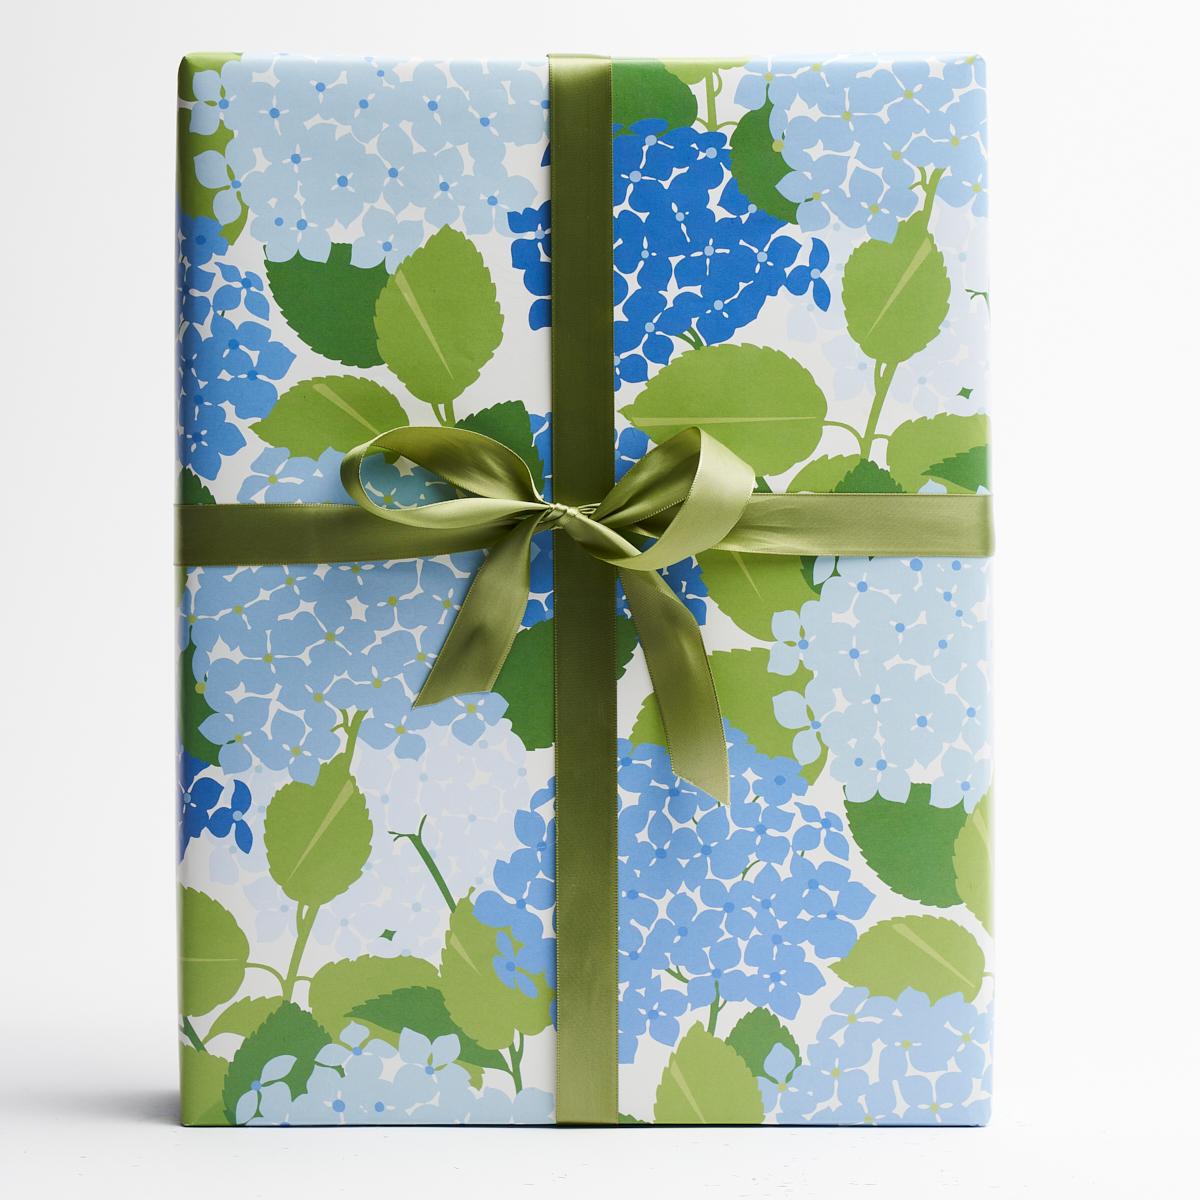 Hydrangea Wrapping Paper_PORCELAIN